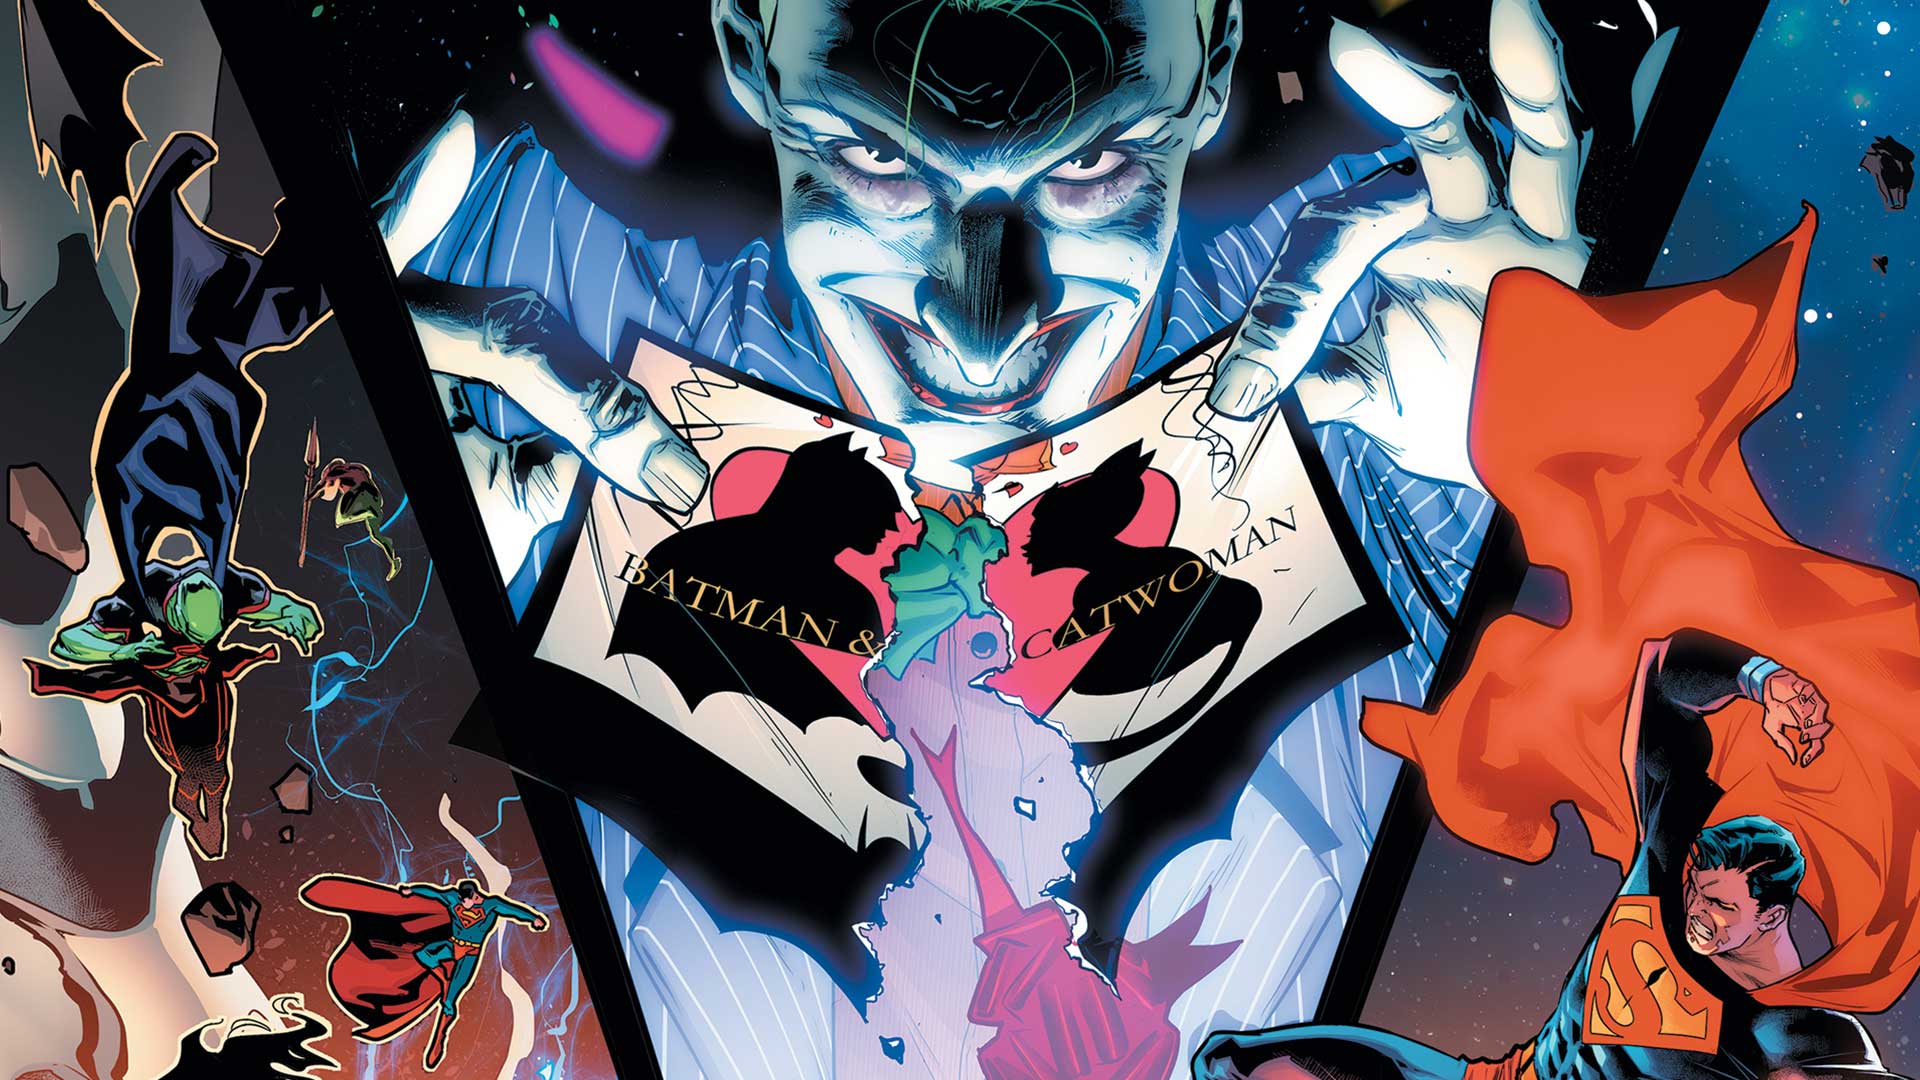 DC Nation #0 Review: At 25 cents it's a steal